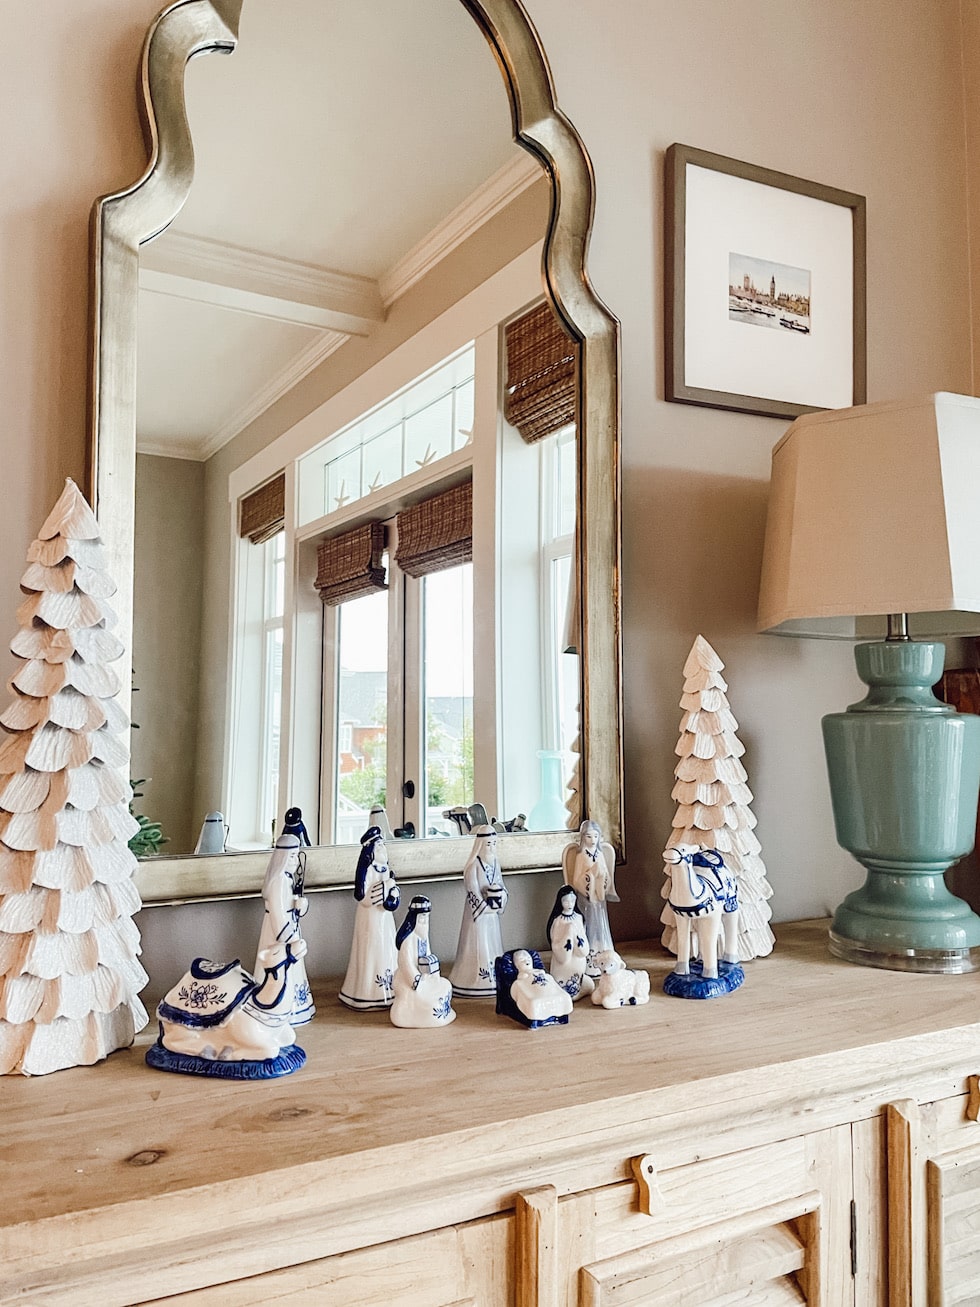 Meaningful Christmas: Our Blue and White Nativity Set